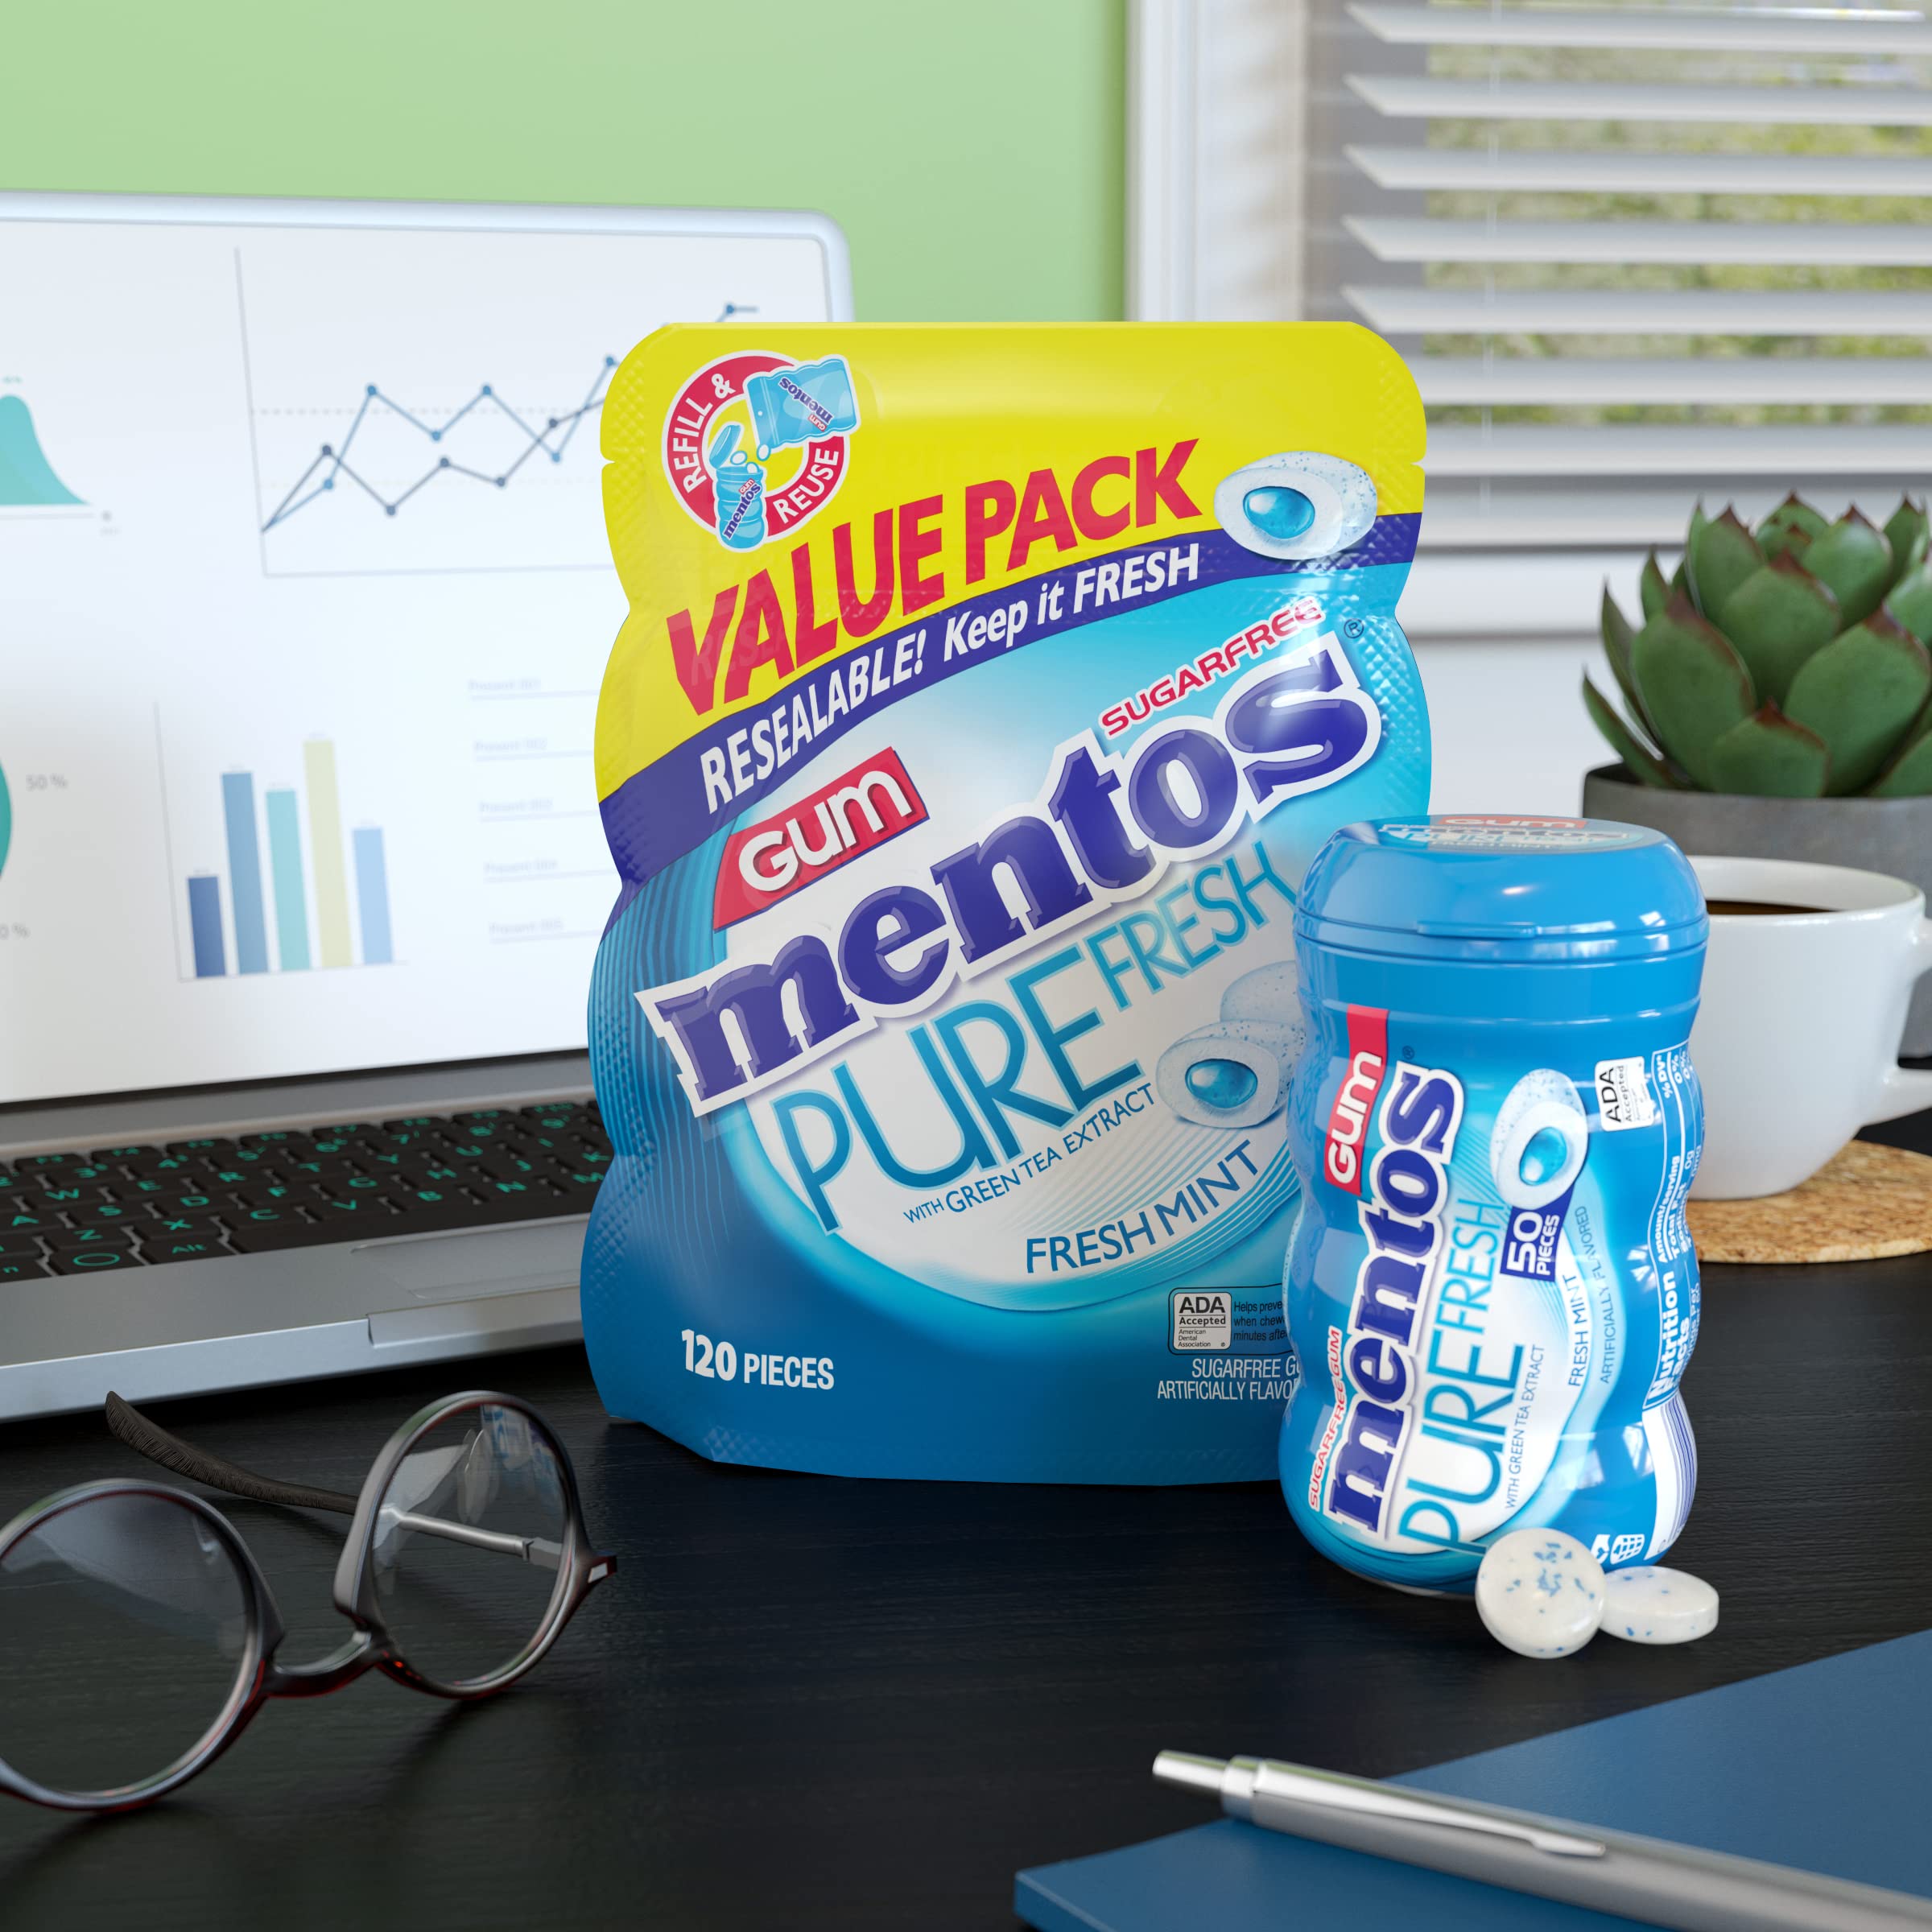 Mentos Pure Fresh Sugar-Free Chewing Gum with Xylitol, Fresh Mint, 120 Piece Bulk Resealable Bag (Pack of 1) $3.8